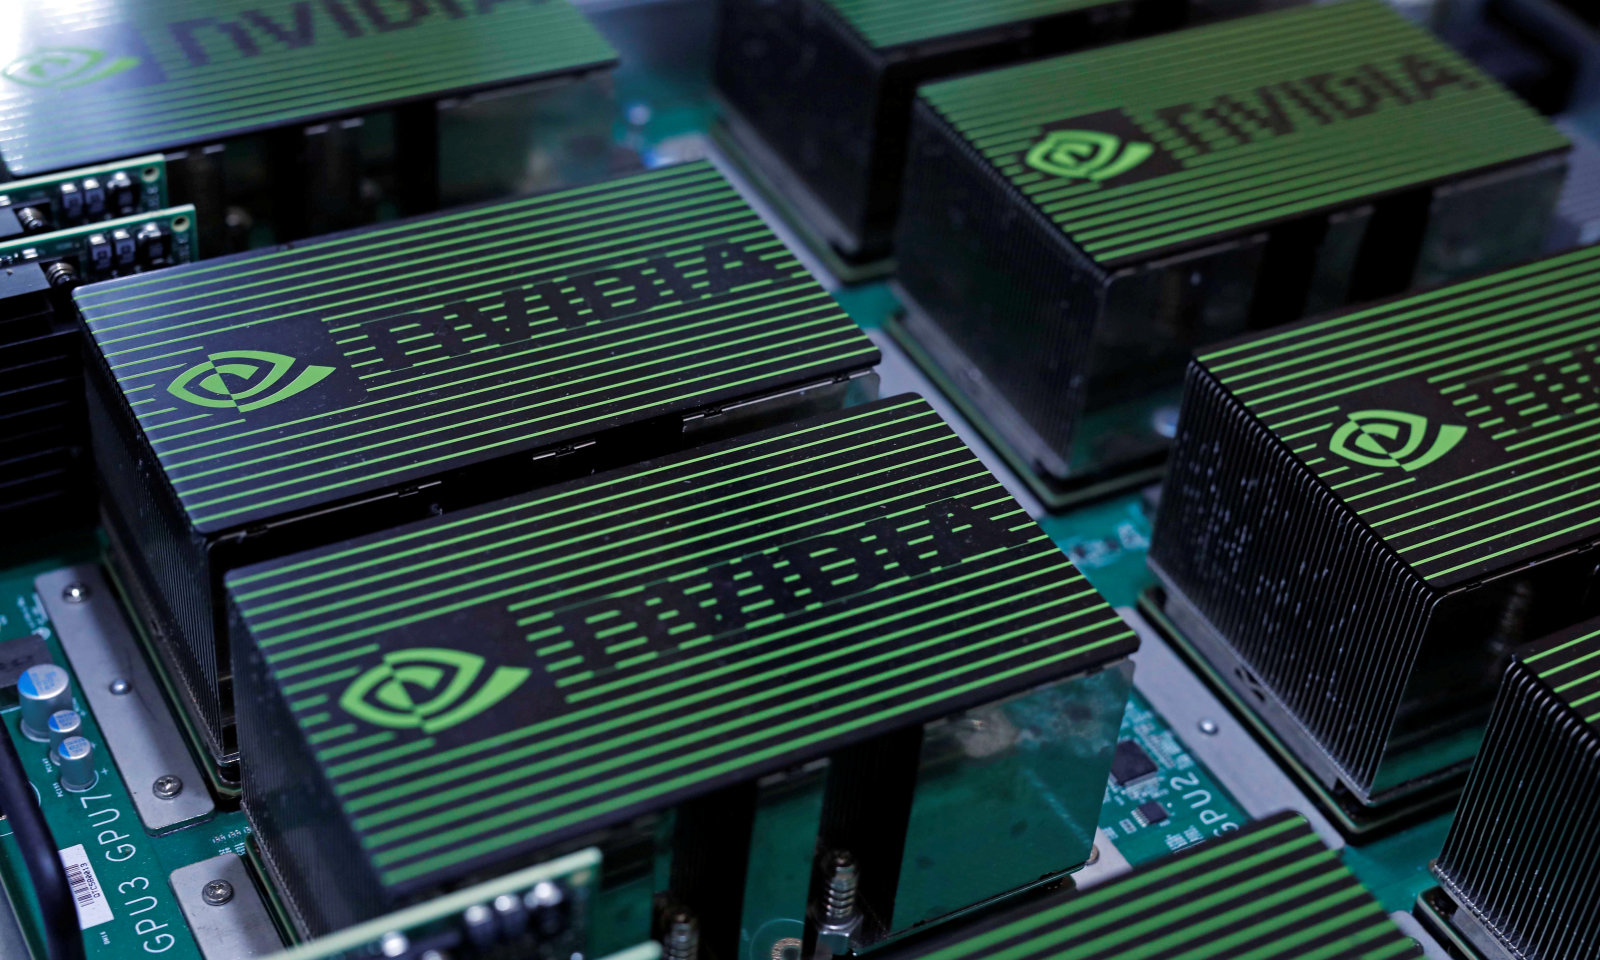 NVIDIA is gearing up to end 32-bit OS support